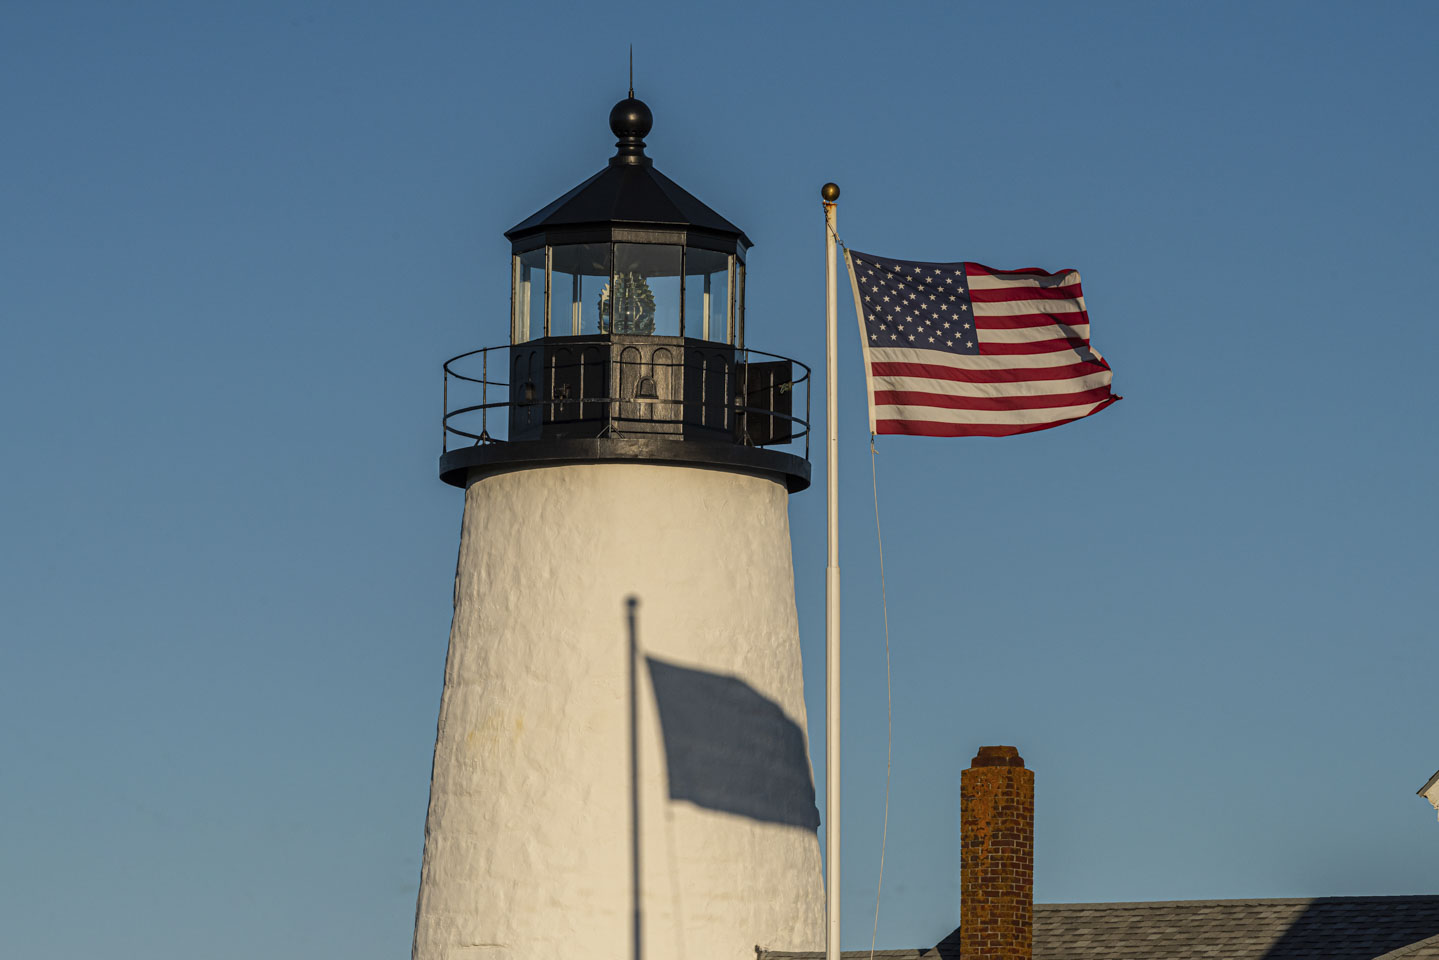 Pemaquid Lighthouse and American flag